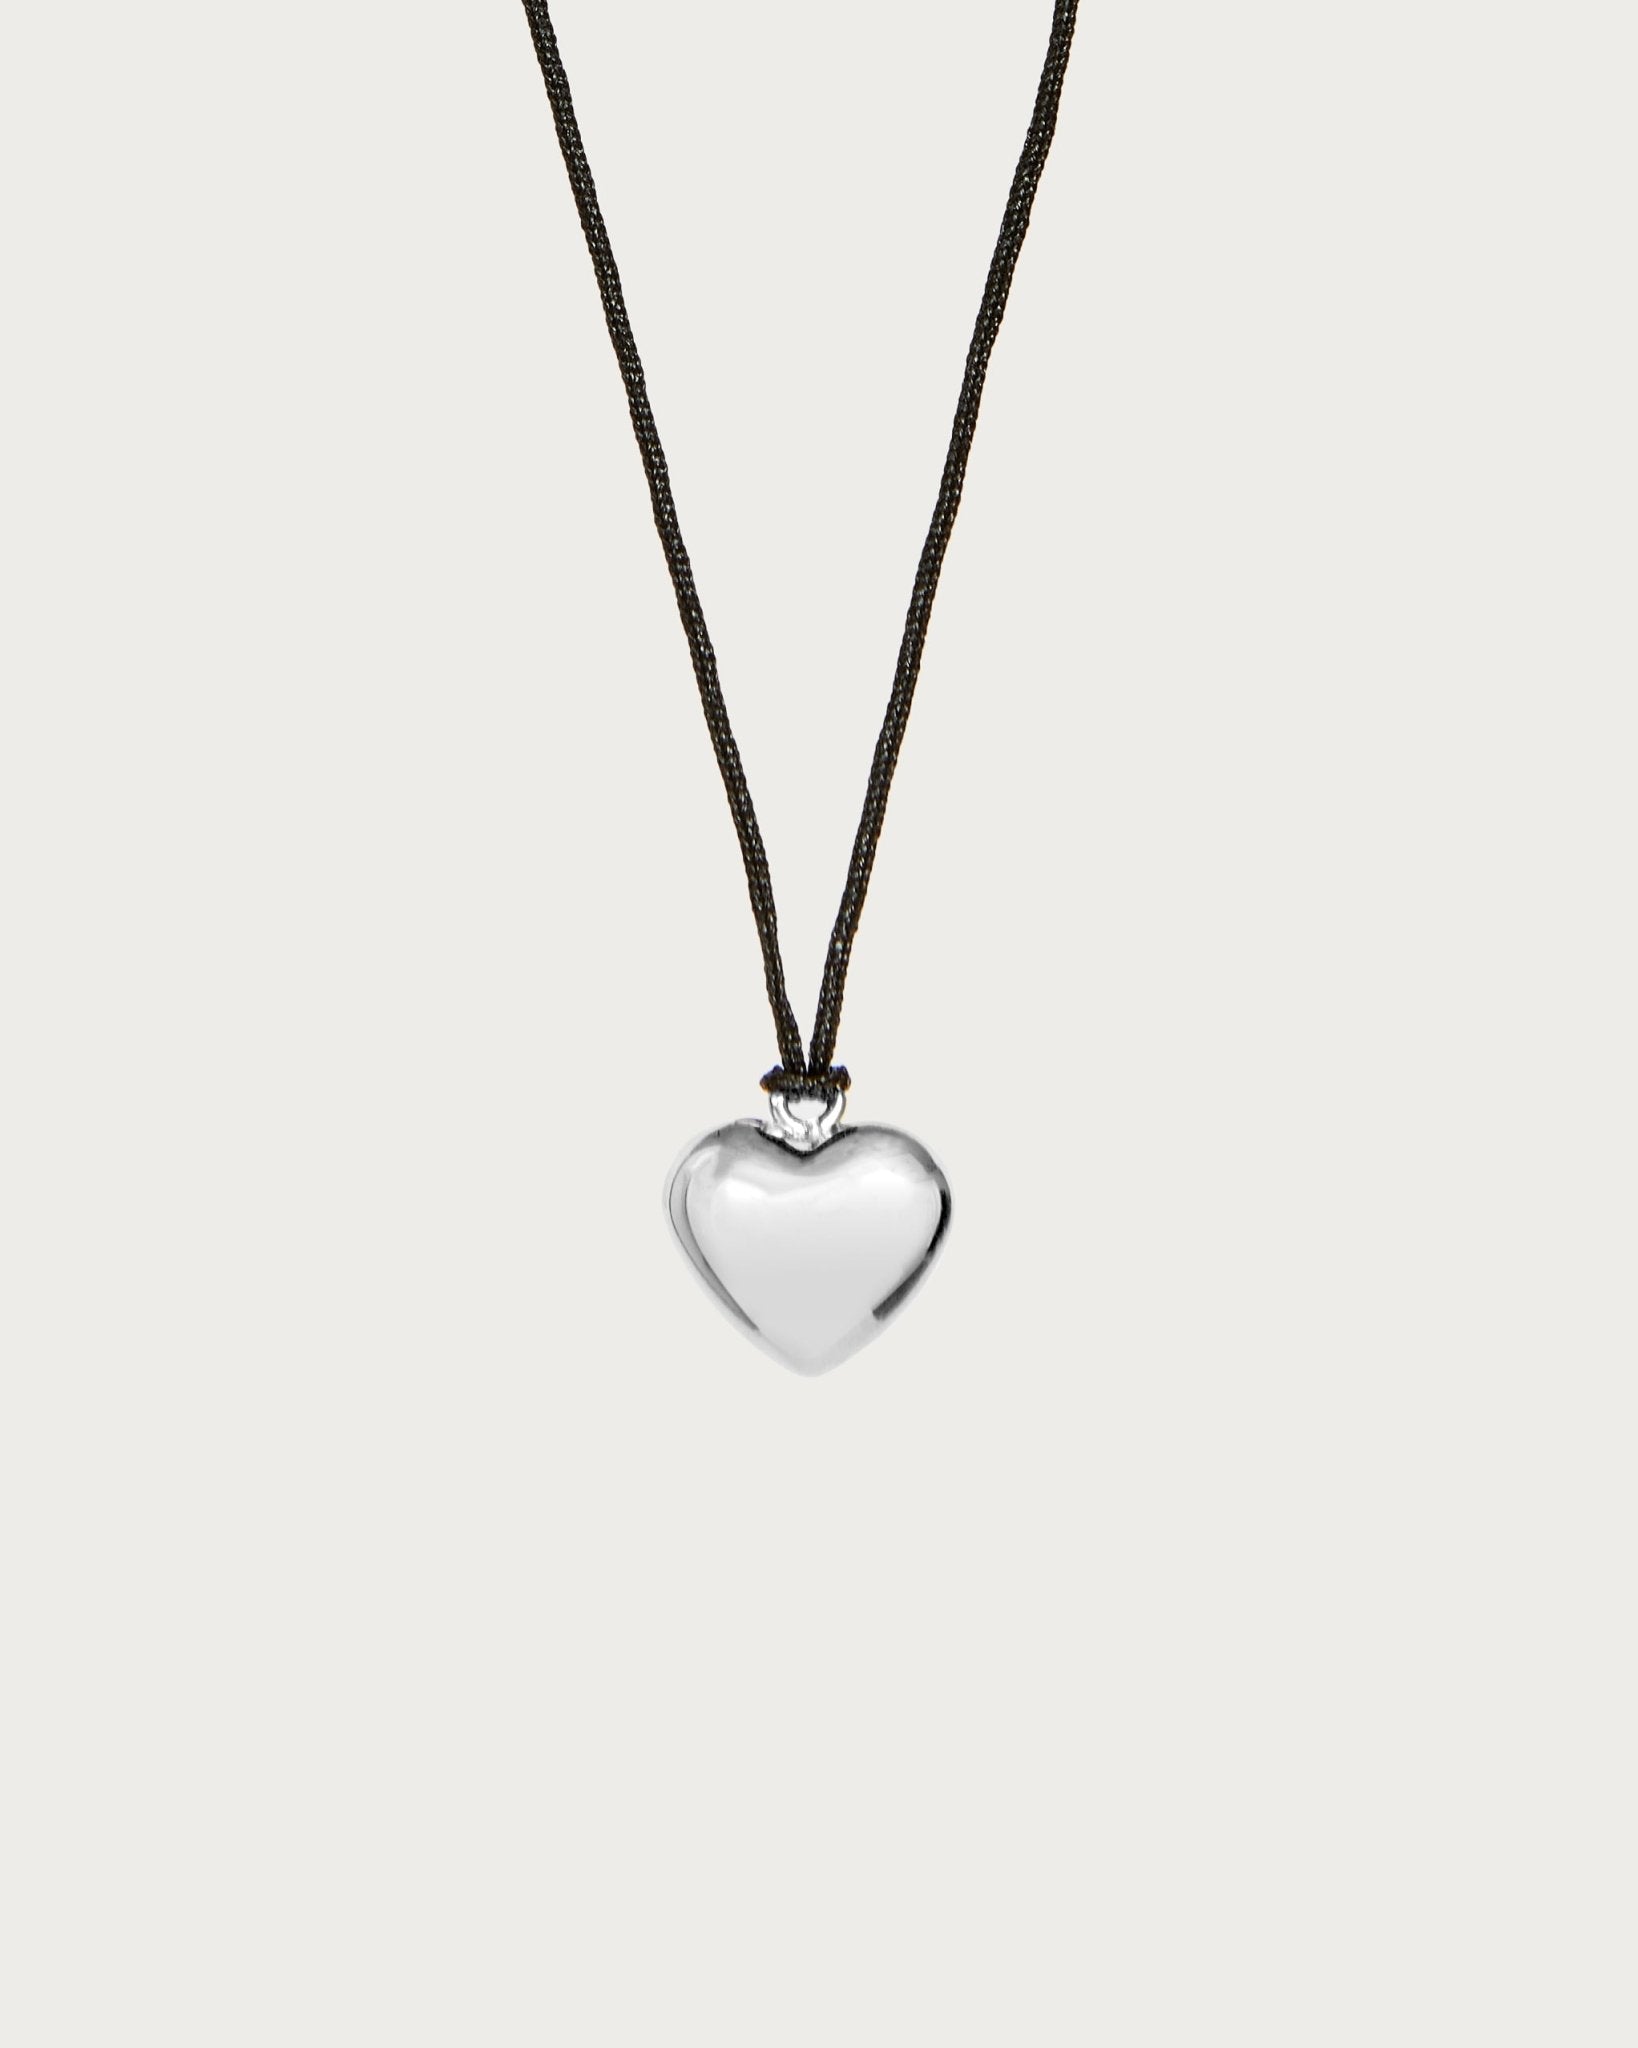 Heart Cord Necklace in Silver